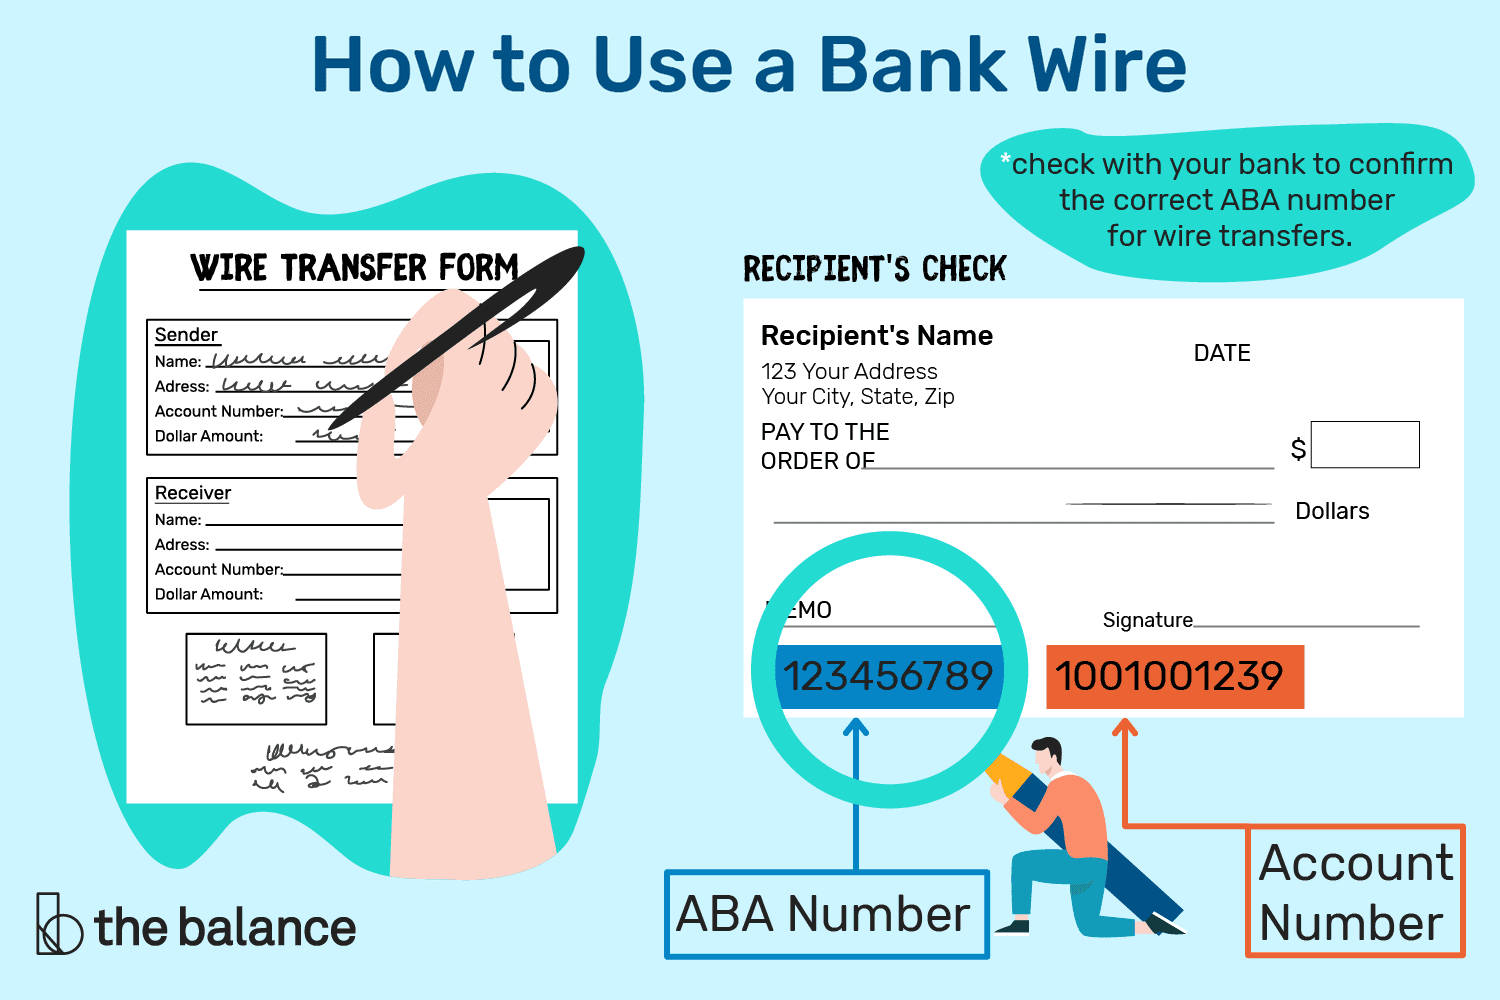 How to Use a Bank Wire. Check With Your Bank to Confirm the Correct ABA Number for Wire Transfers.